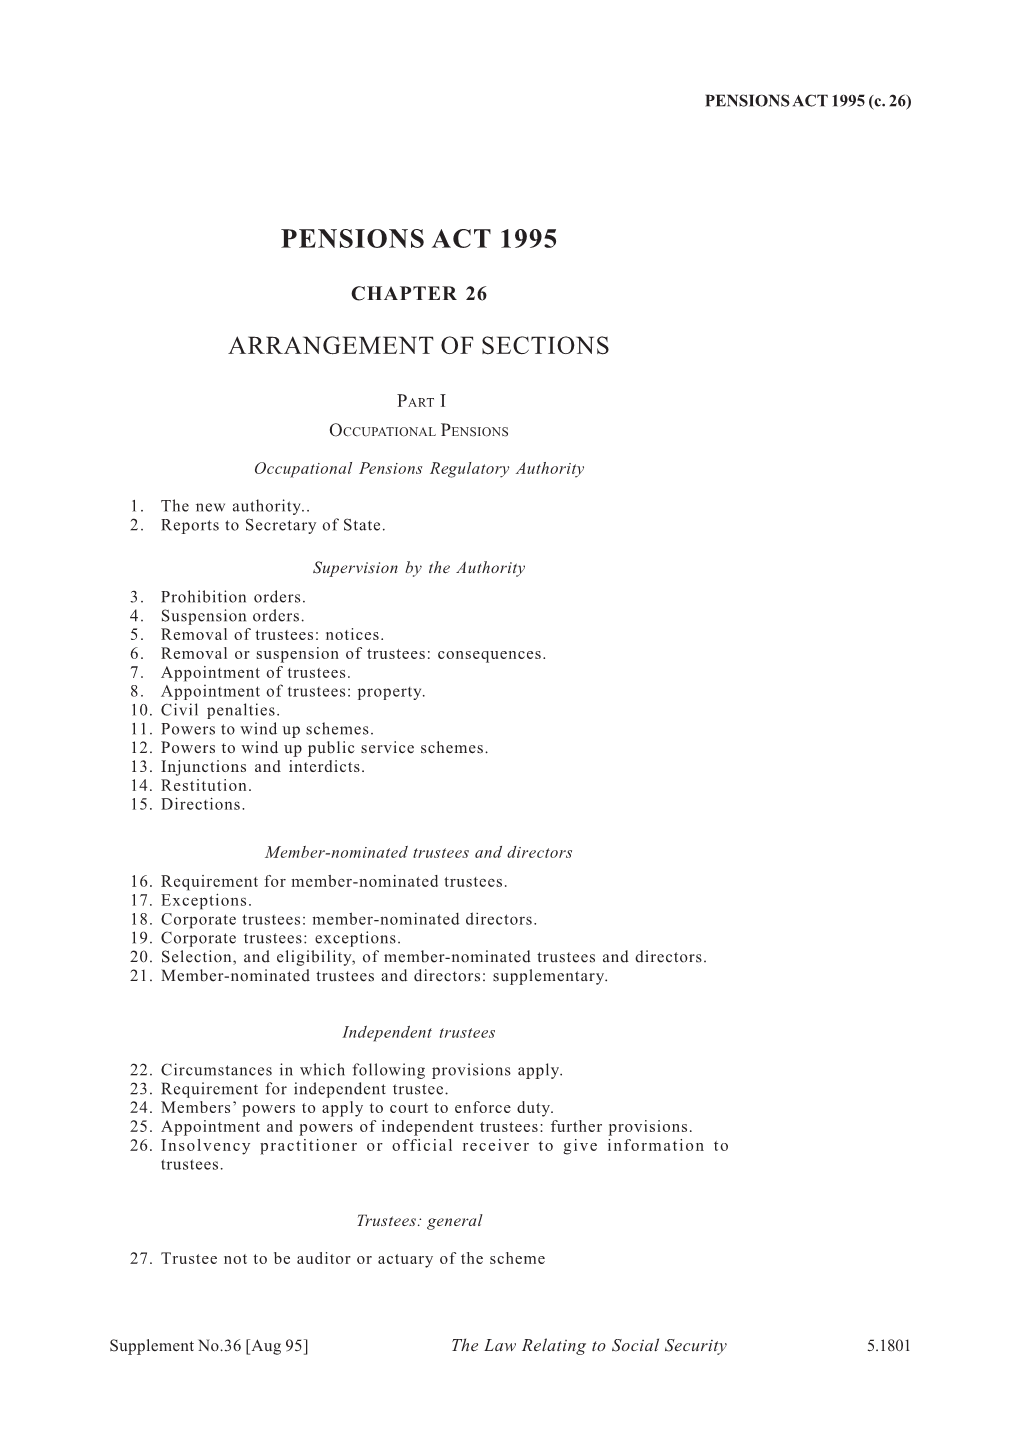 PENSIONS ACT 1995 (C